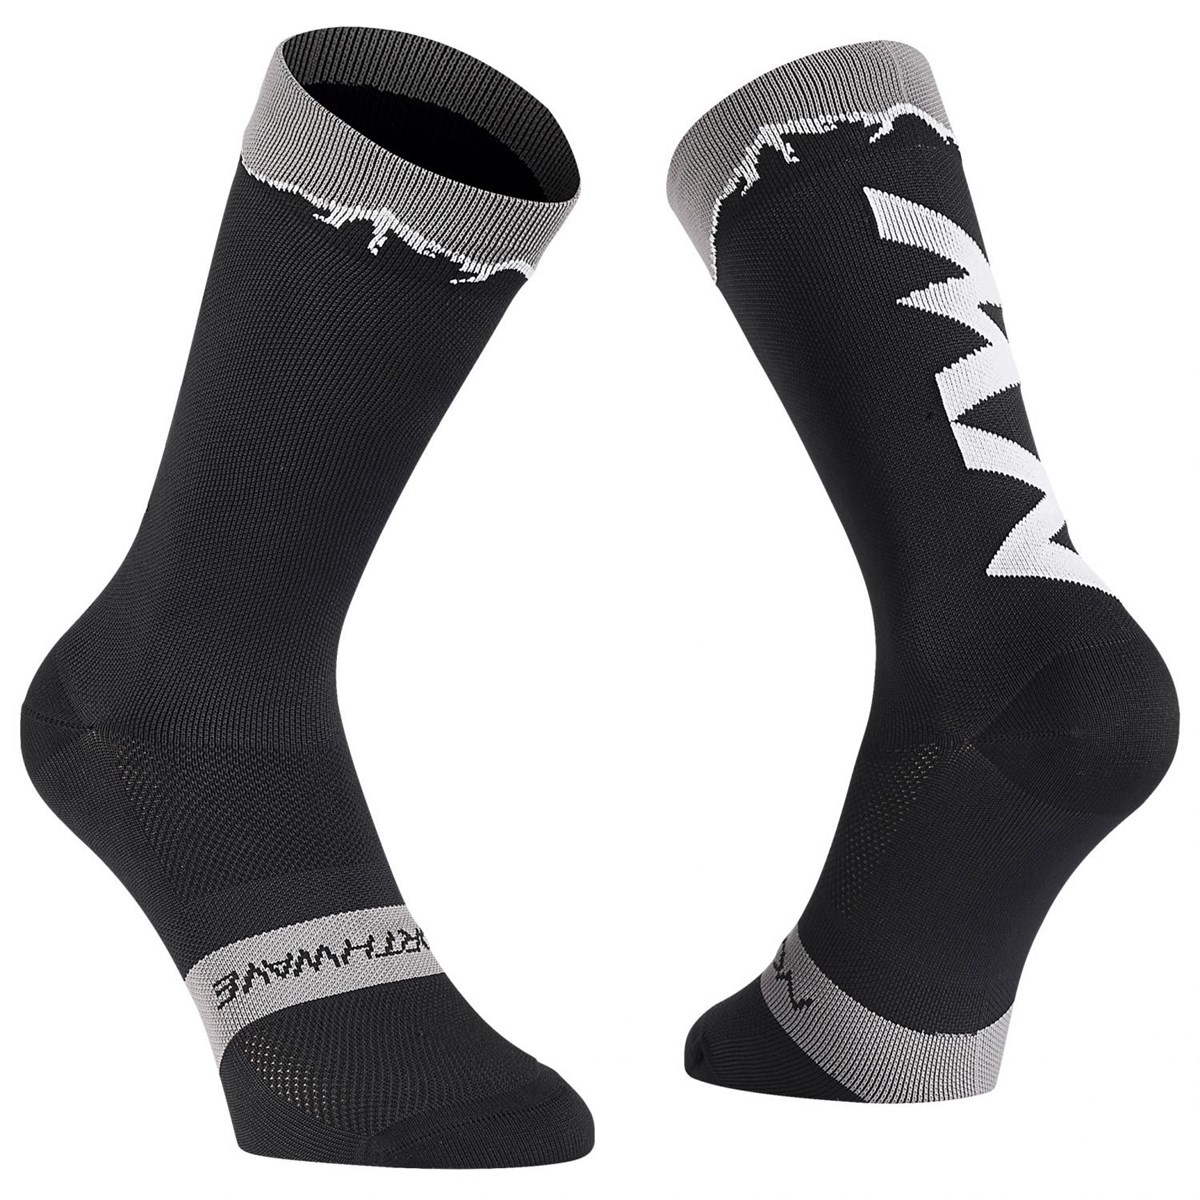 Northwave Clan Cycling Socks product image